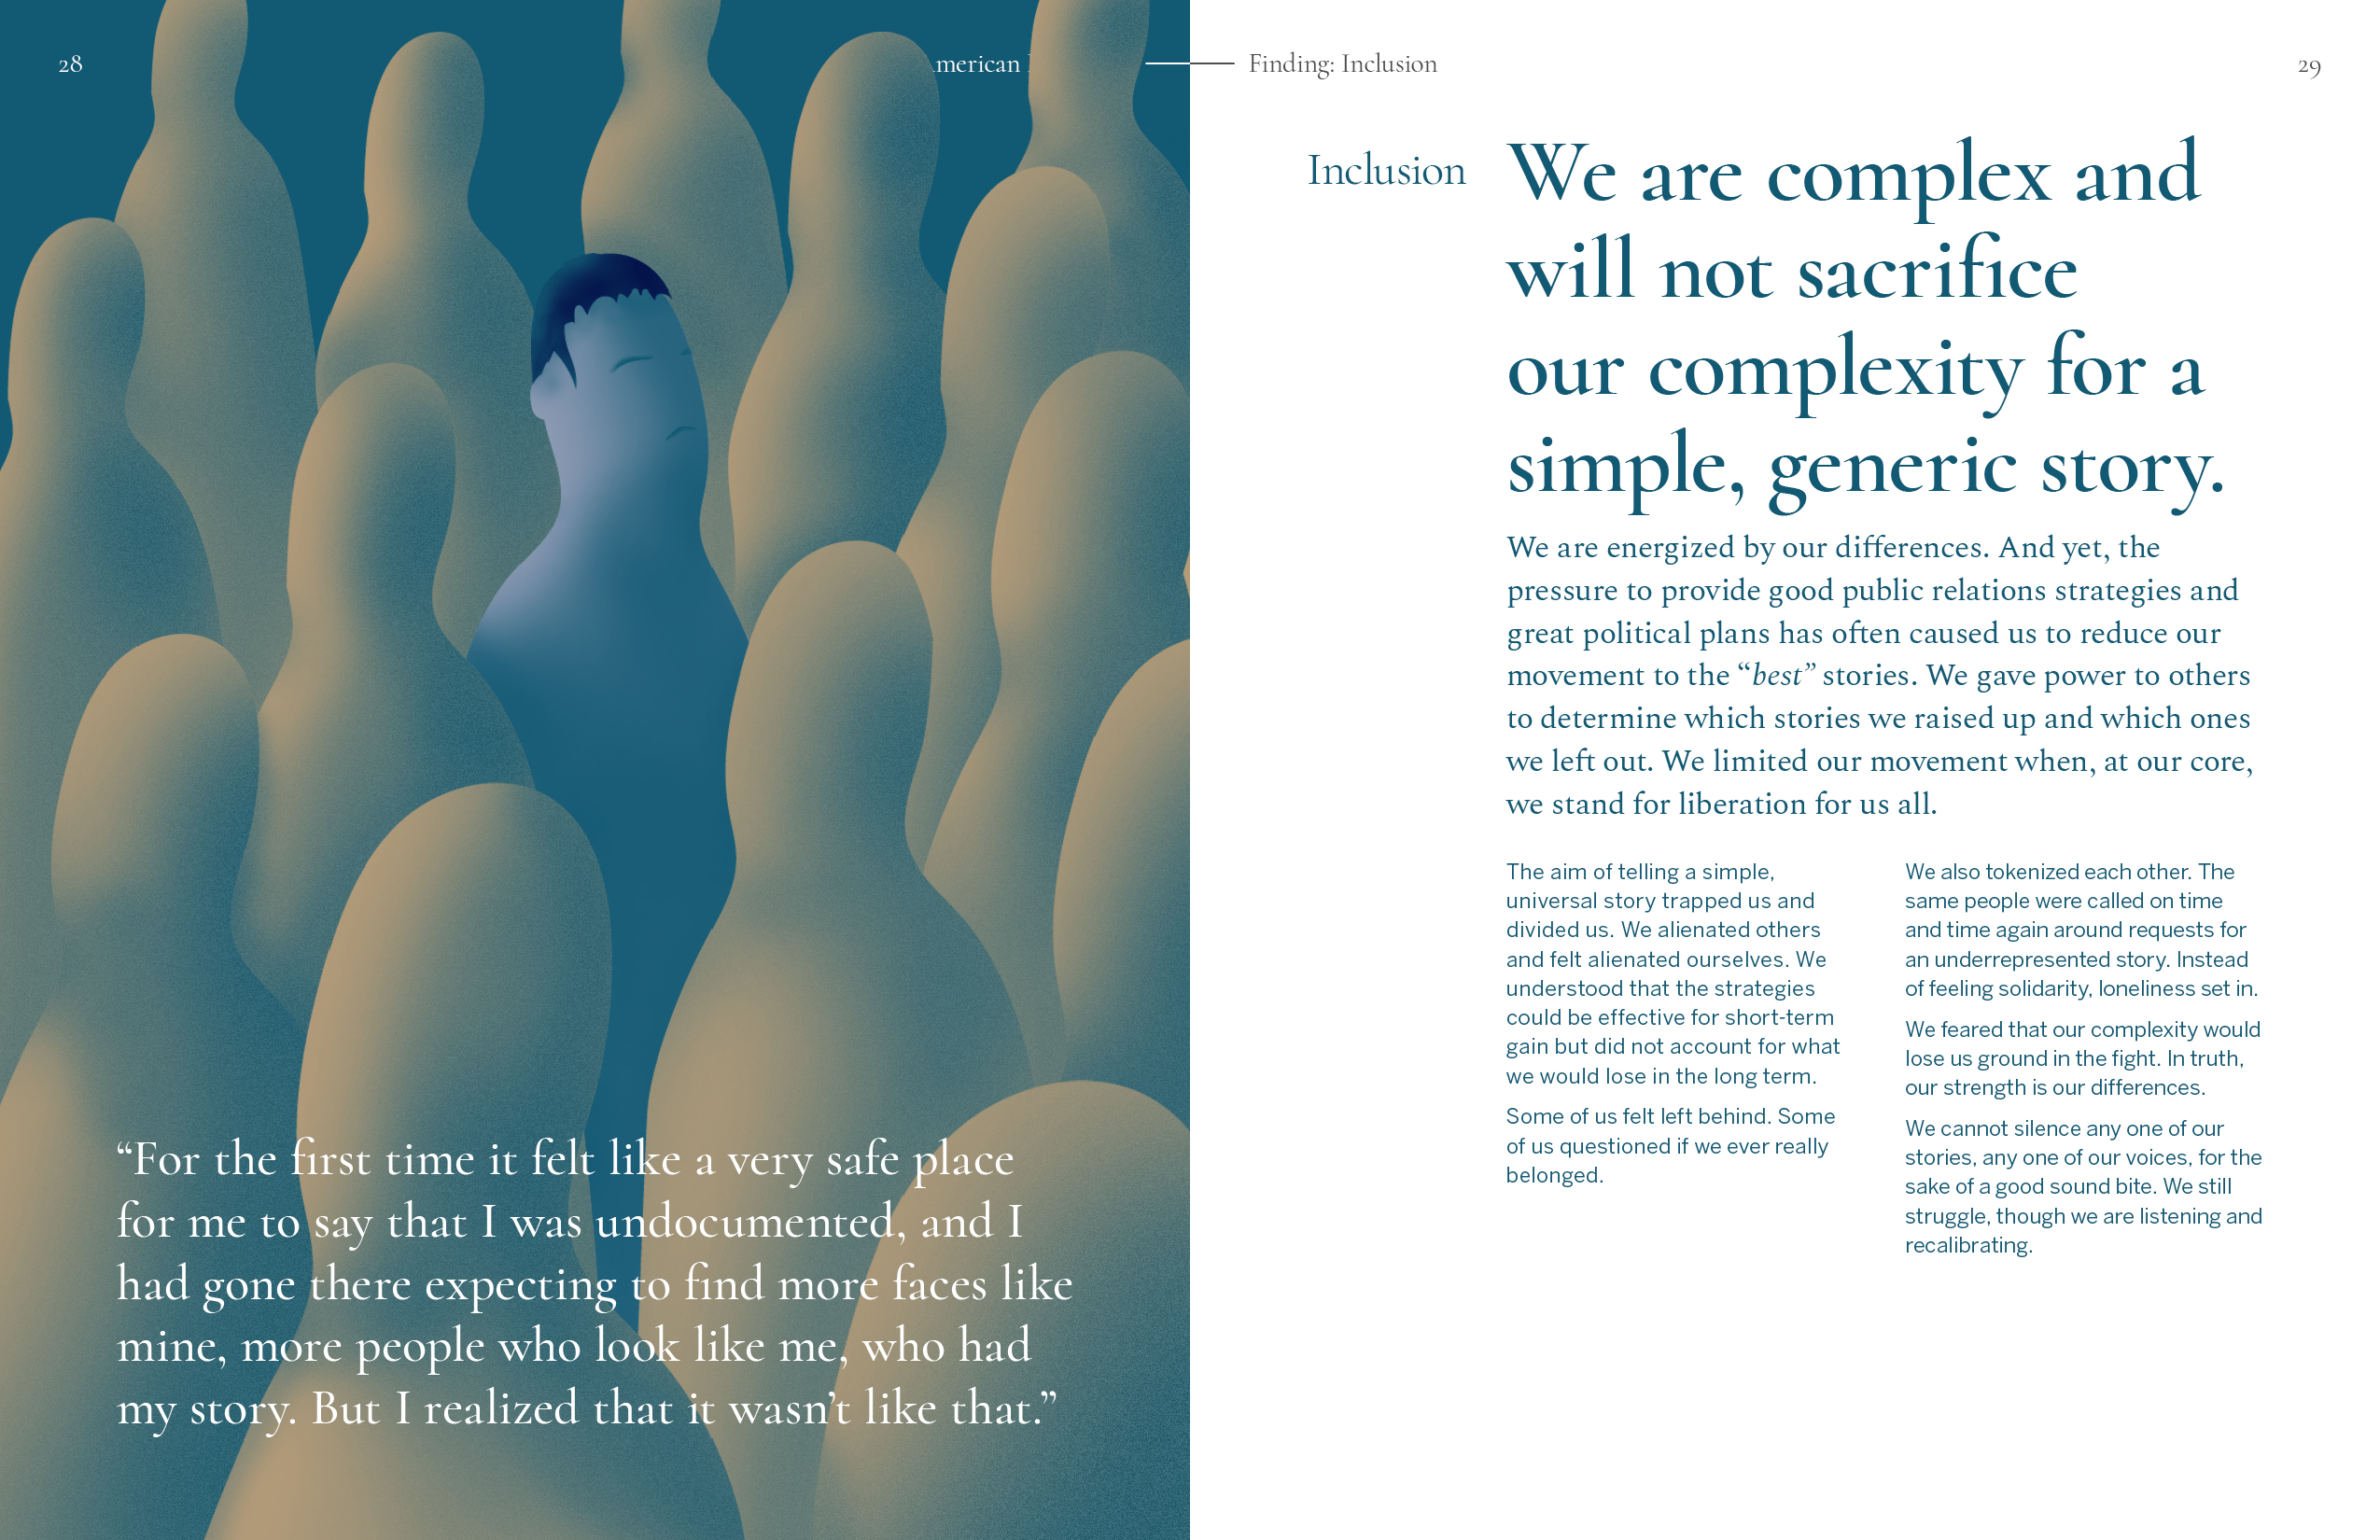 A spread with an illustration of a single person in a crowd, facing in the opposite direction. To the right is the heading 'Inclusion: We are complex and will not sacrifice our complexity for a simple, generic story.'